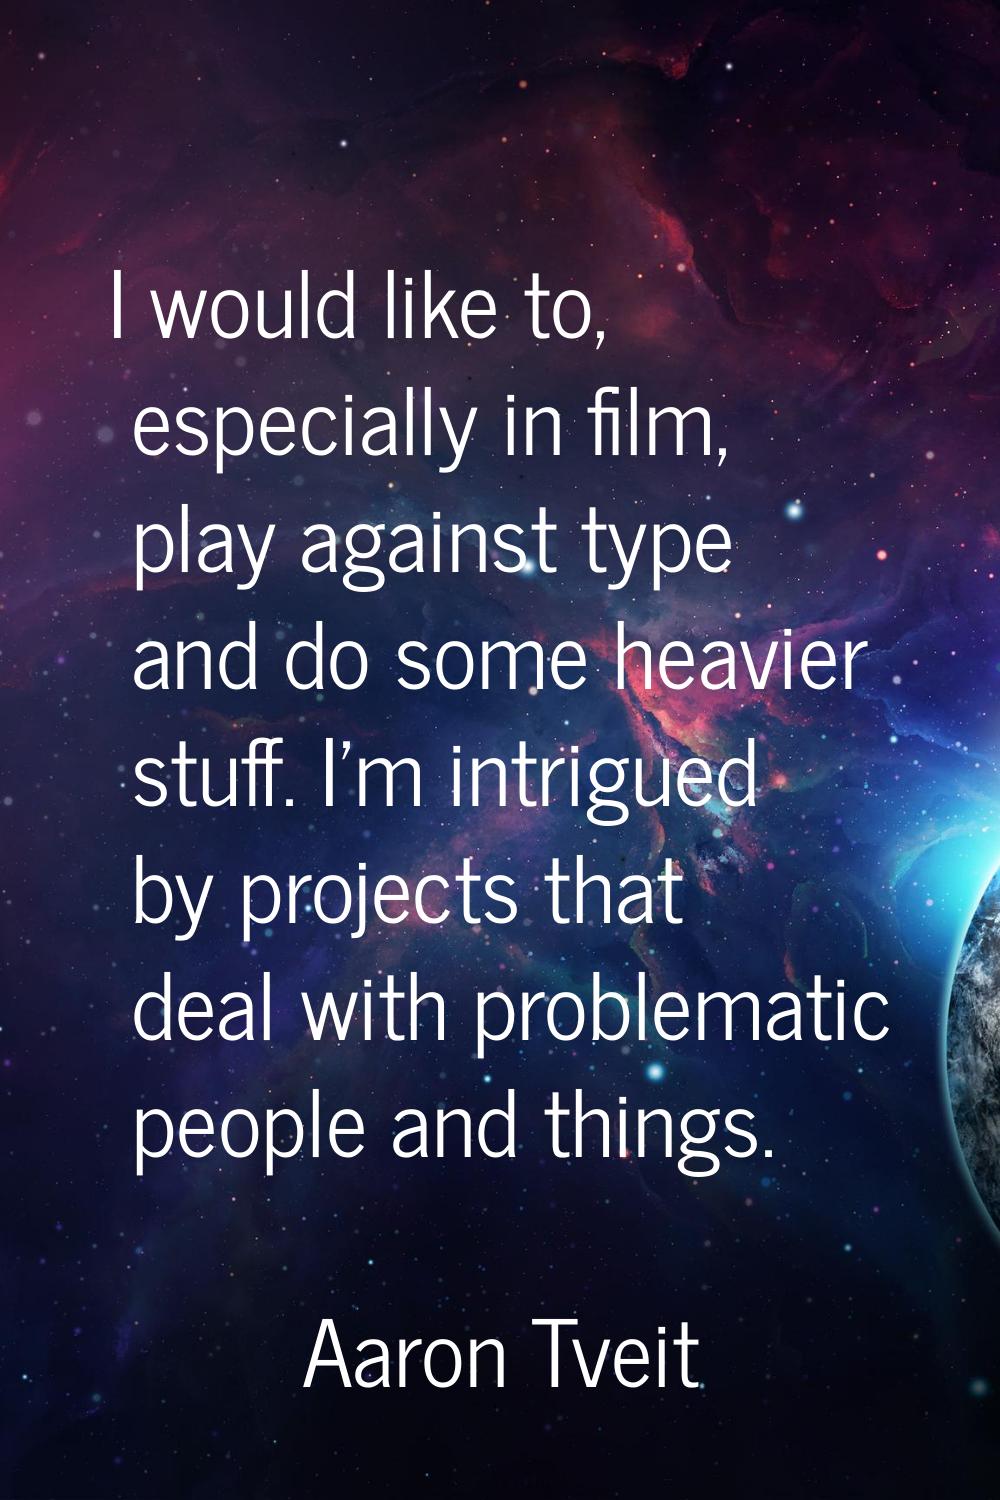 I would like to, especially in film, play against type and do some heavier stuff. I'm intrigued by 